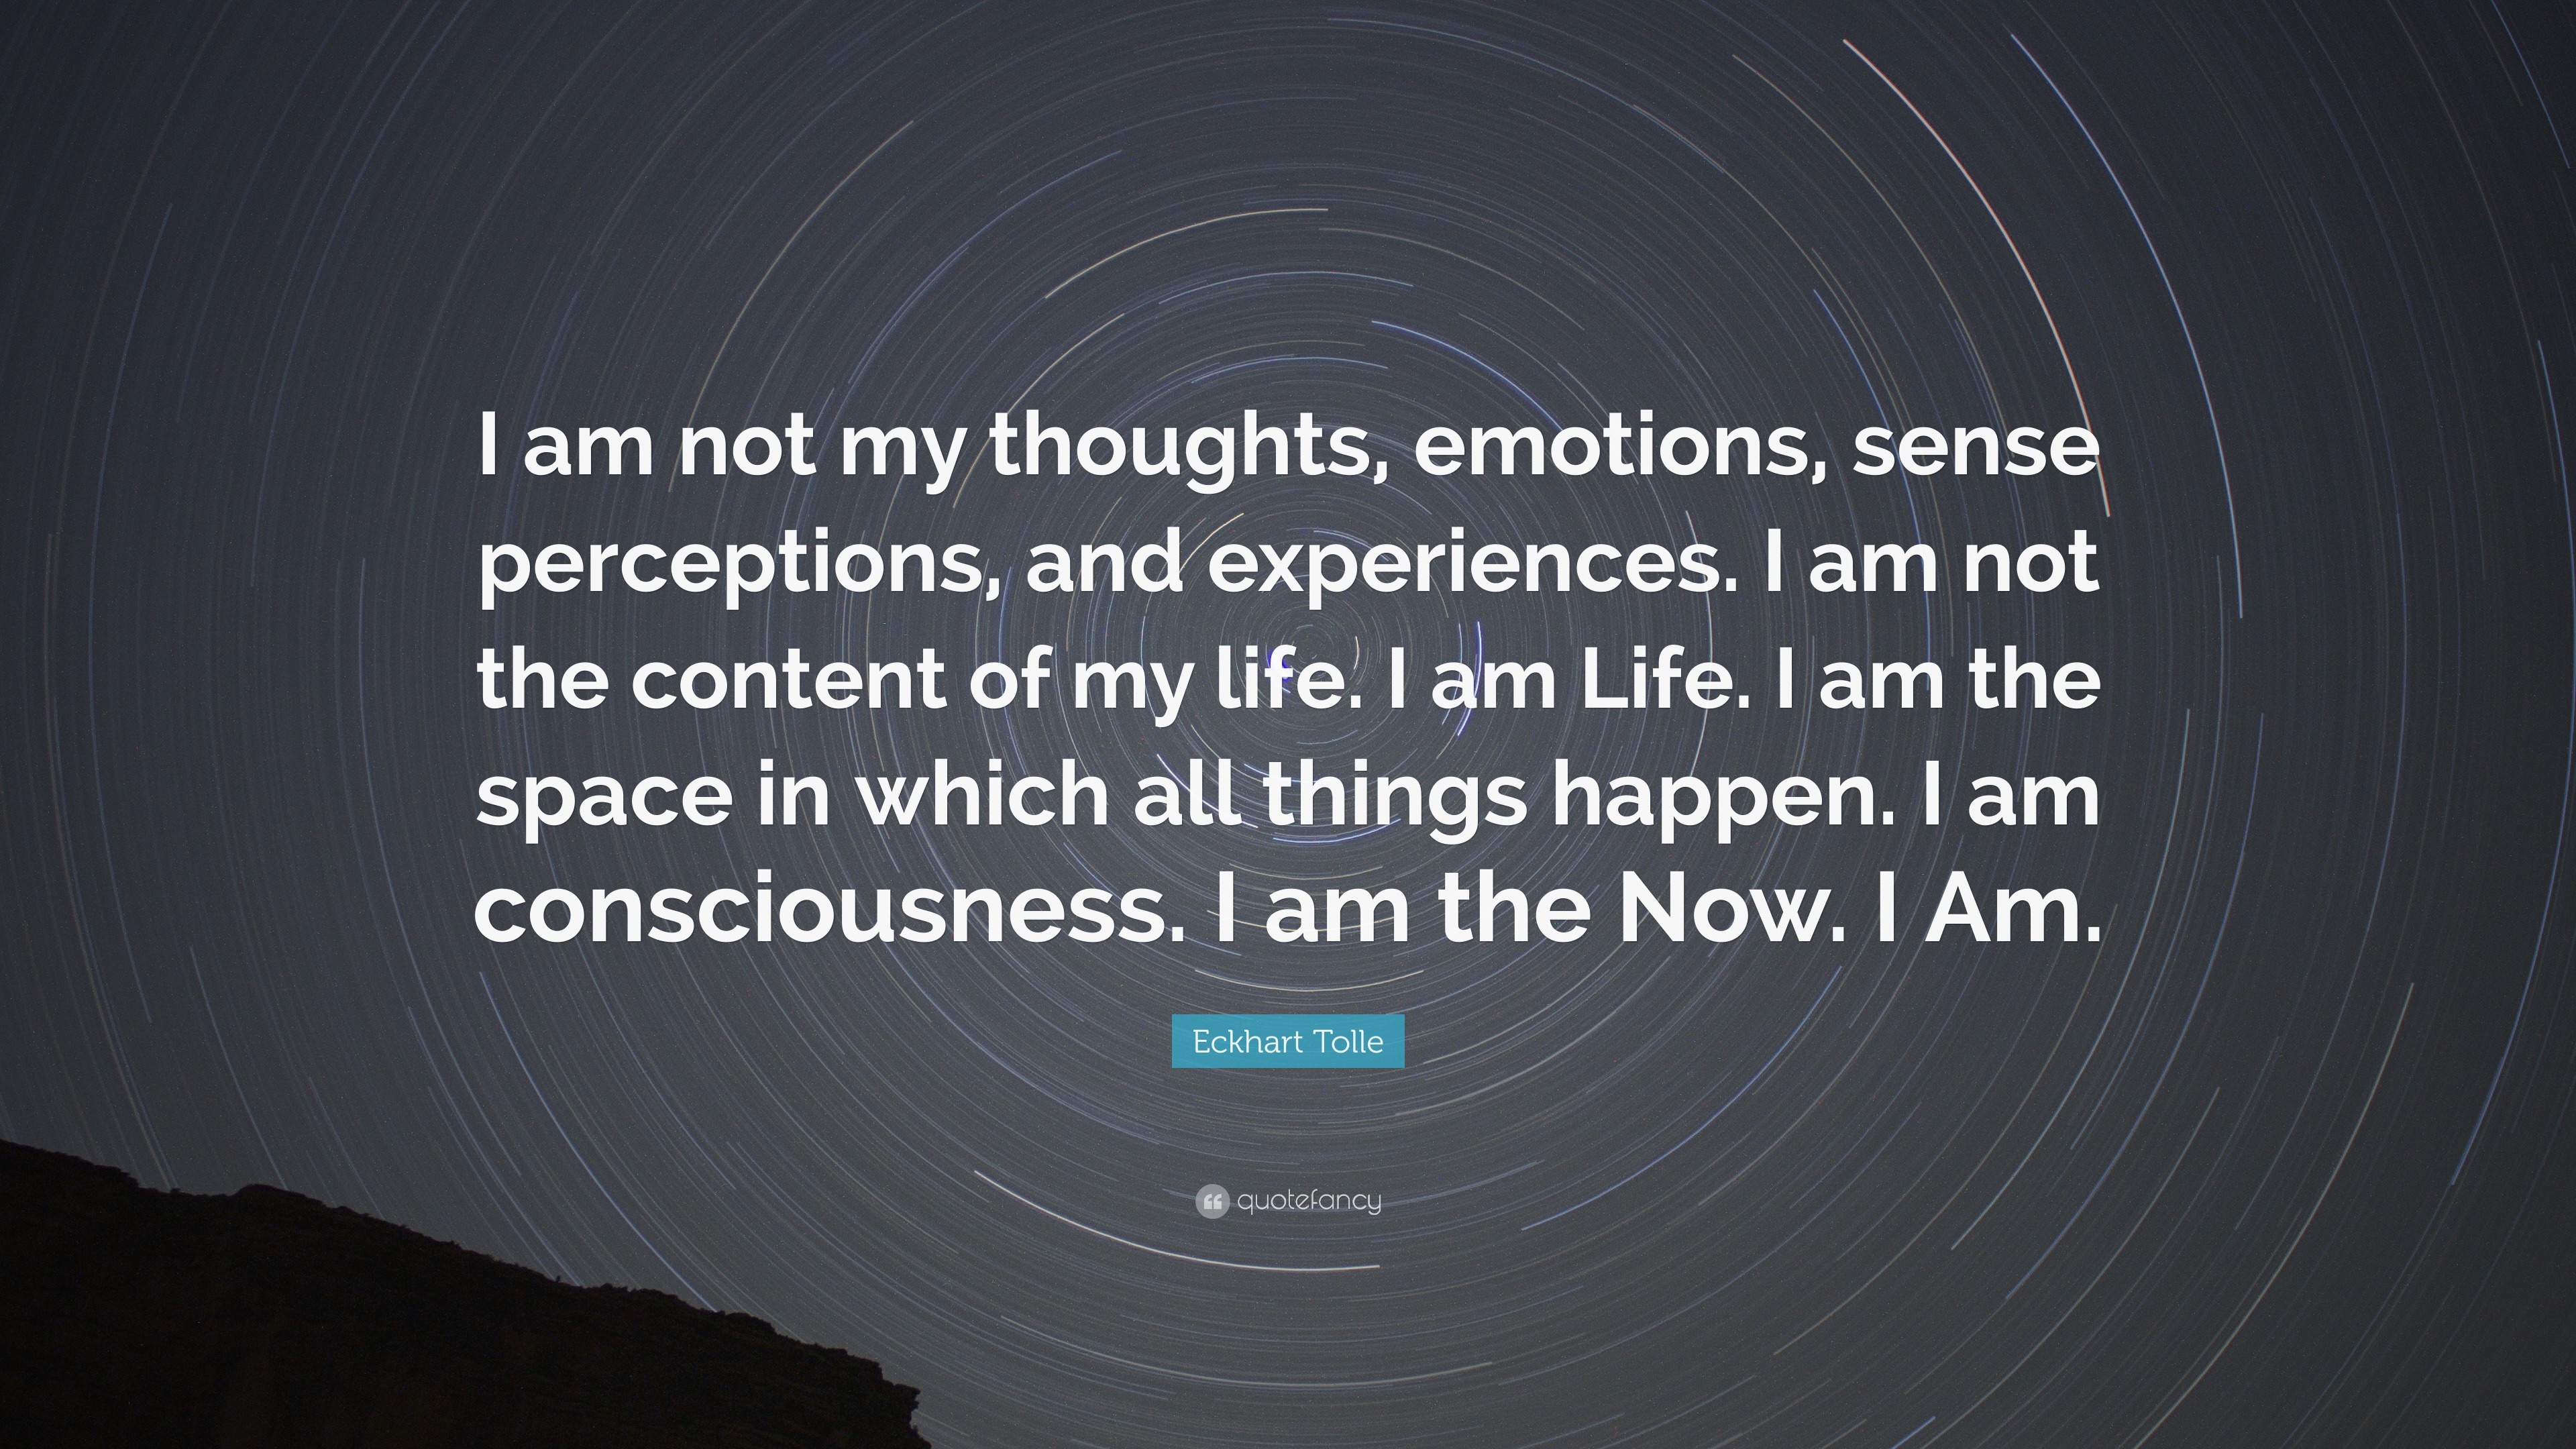 Eckhart Tolle Quotes (100 wallpapers) - Quotefancy